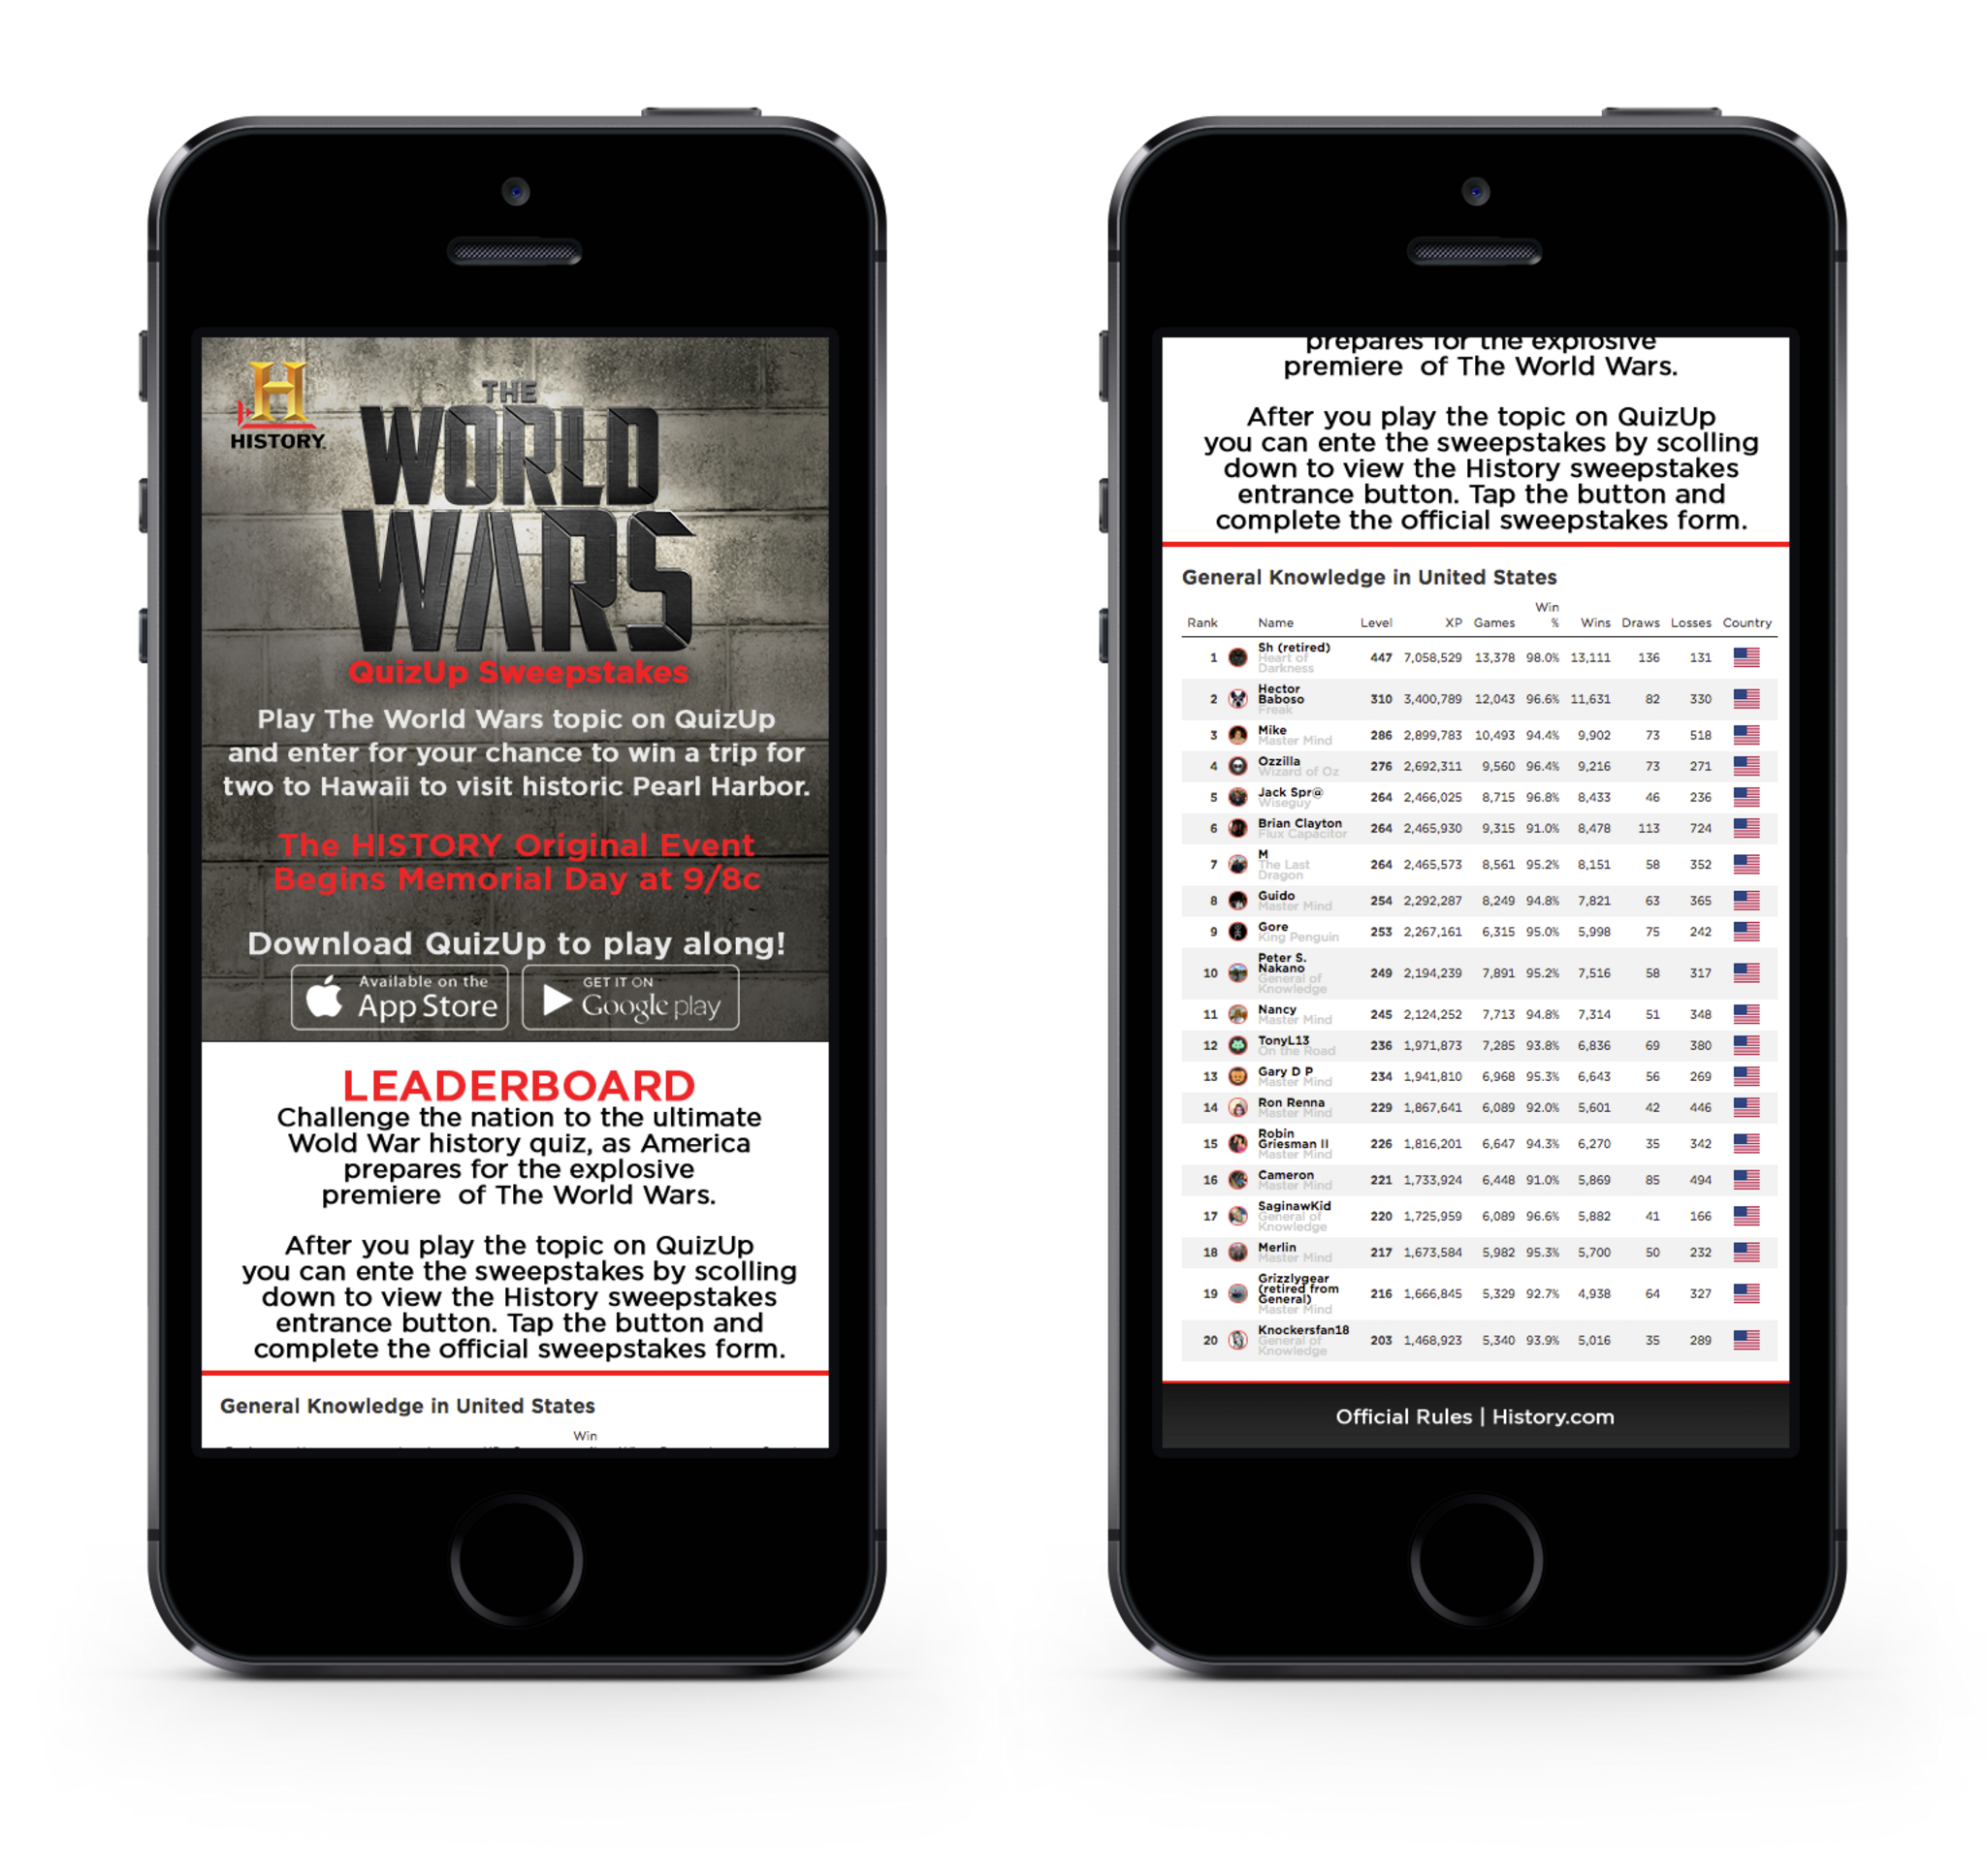 WAR OF WITS MOBILE PROMOTION GIVES HISTORY MINI-SERIES THE AUDIENCE IT DESERVED